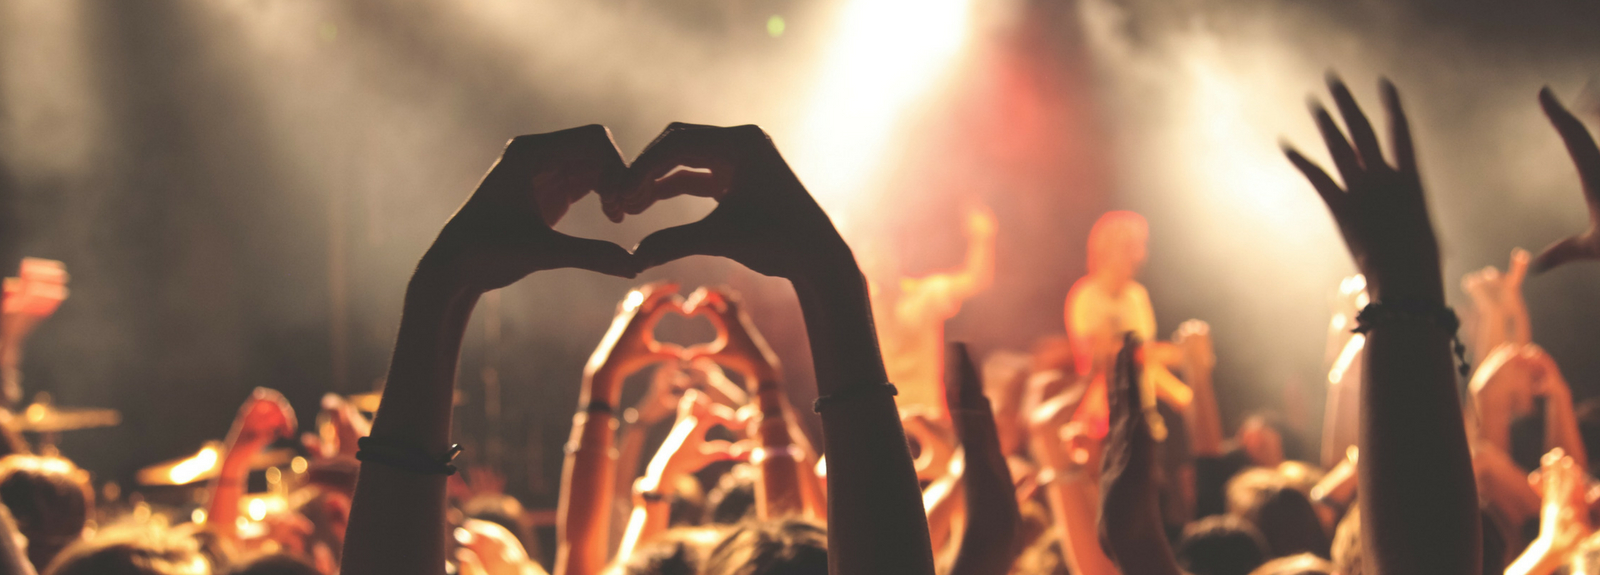 1600x575 crowd in a club, heart with hands